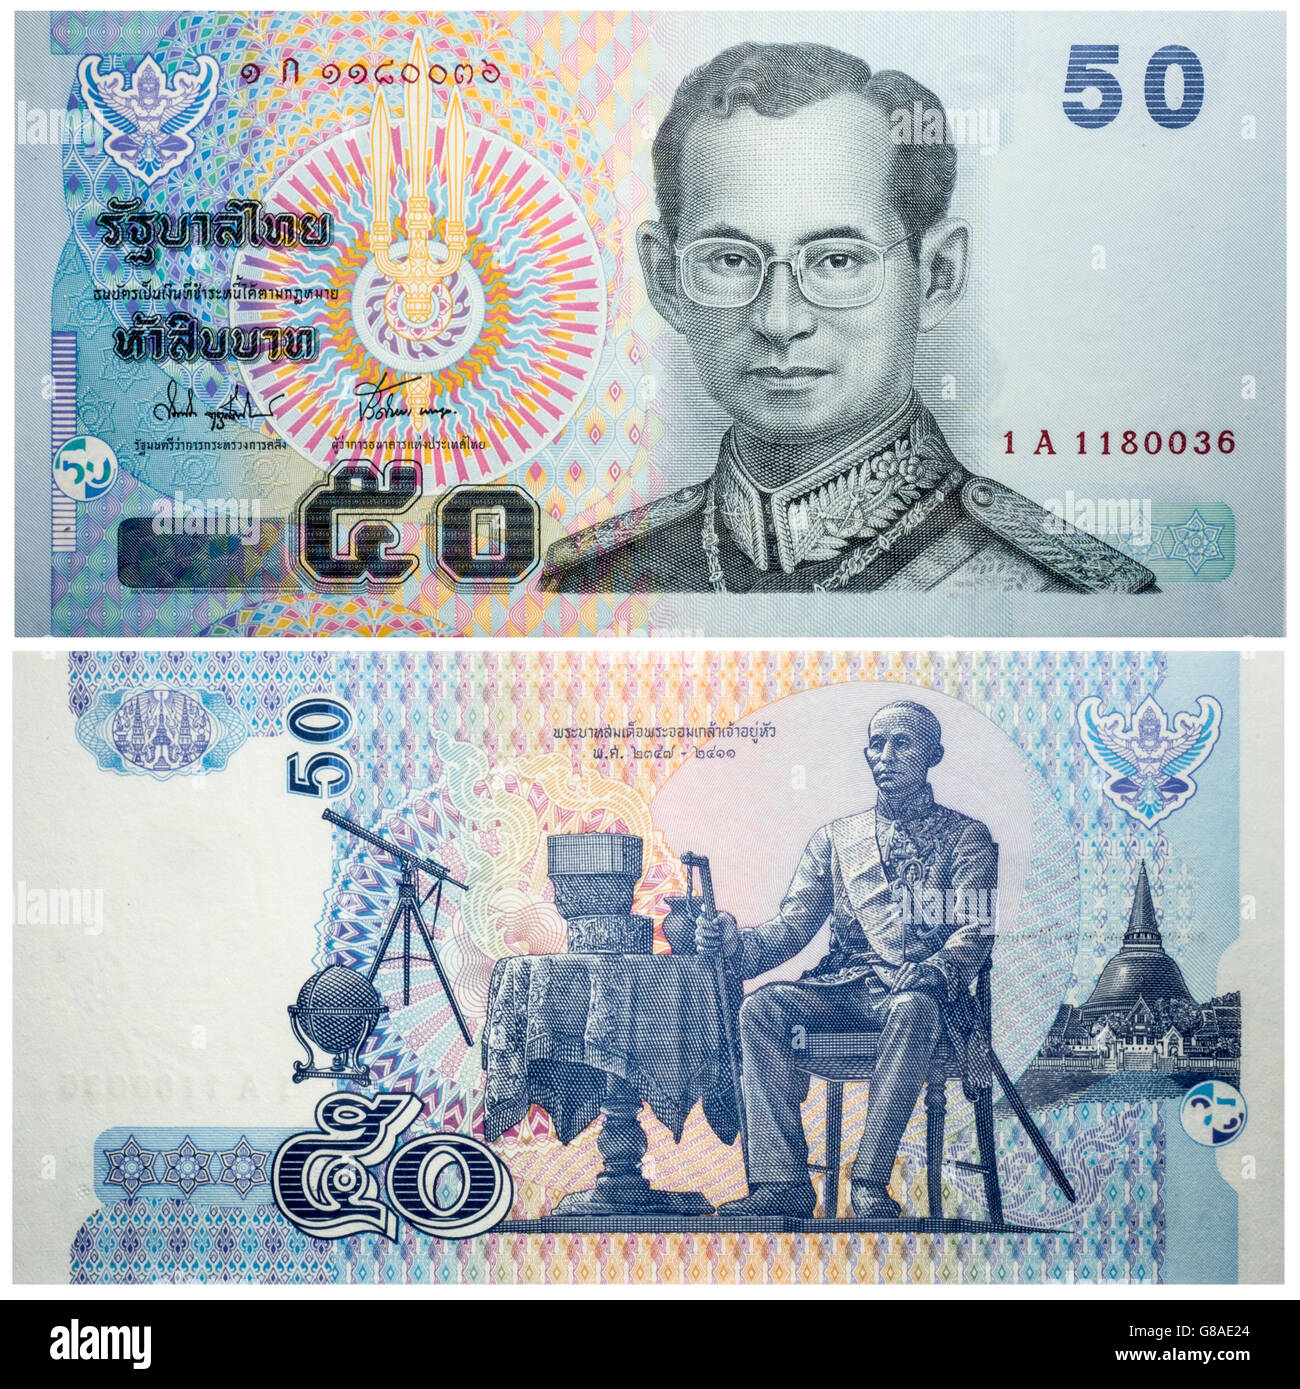 Banknote 50 baht Thailand front and back isolated on white emitted on 2004. King Rama lX in Field Marshal's uniform at center Stock Photo